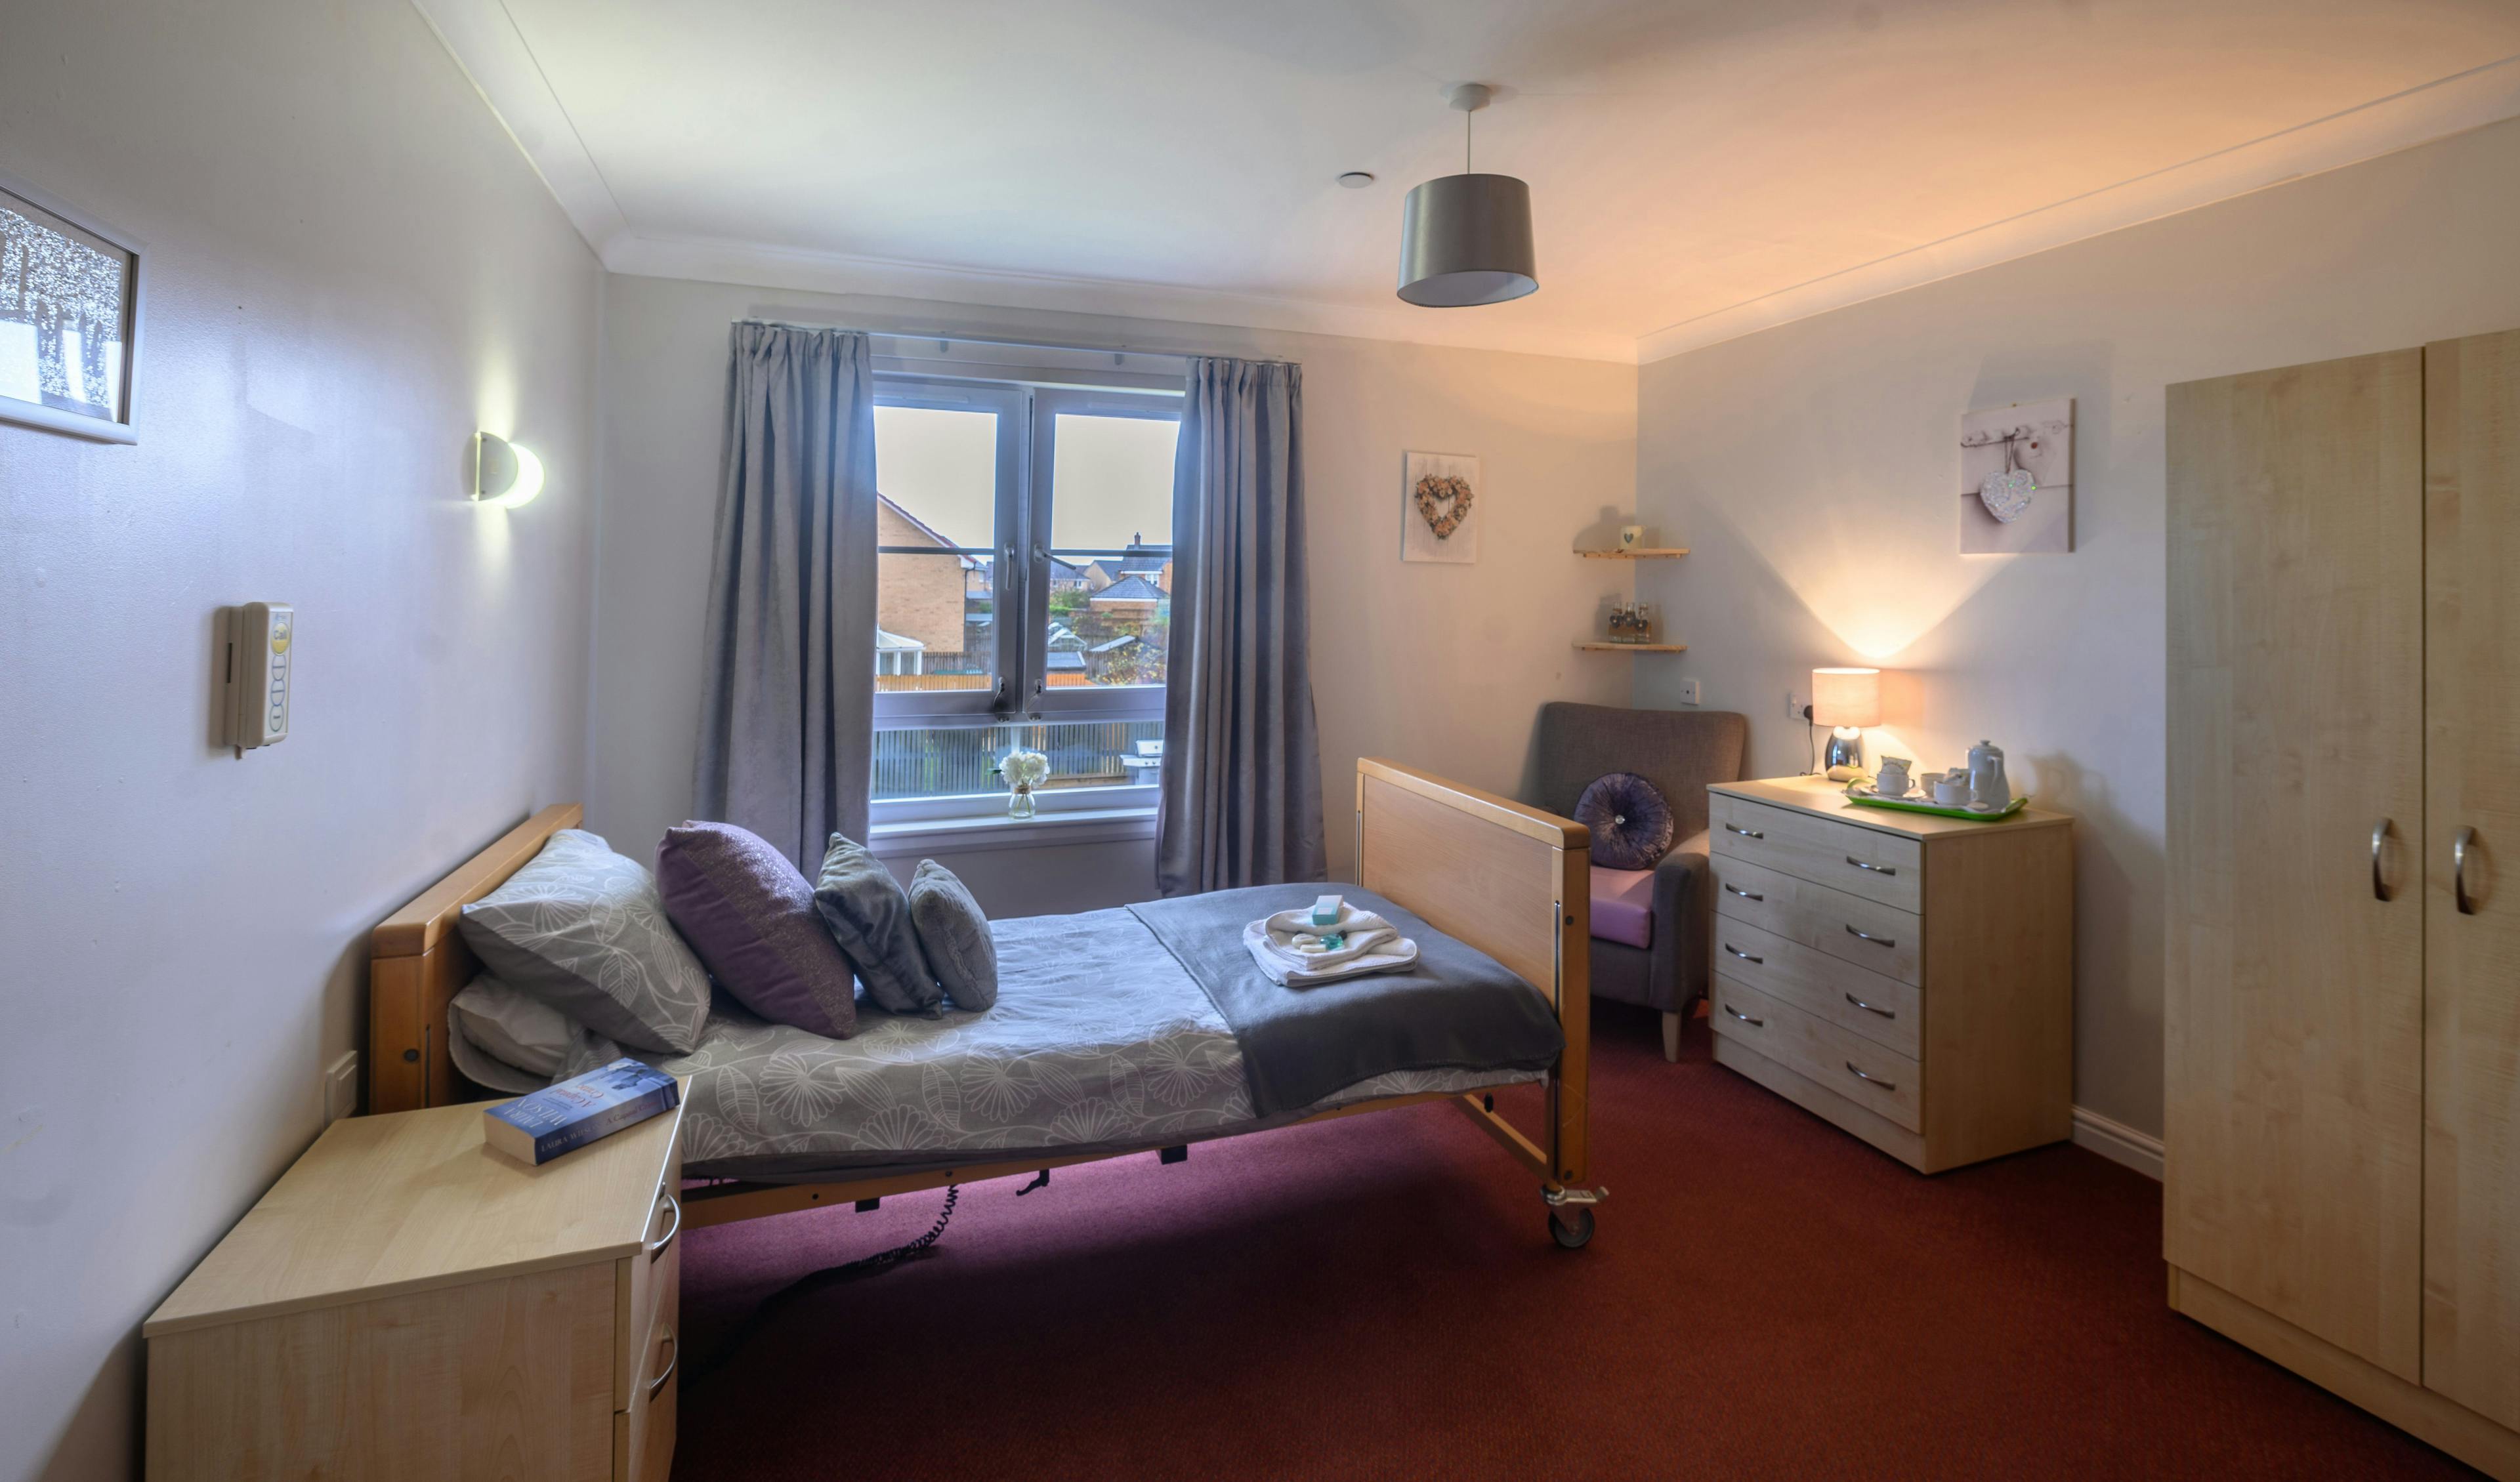 Bedroom of Caledonian Court Care Home in Falkirk, Scotland